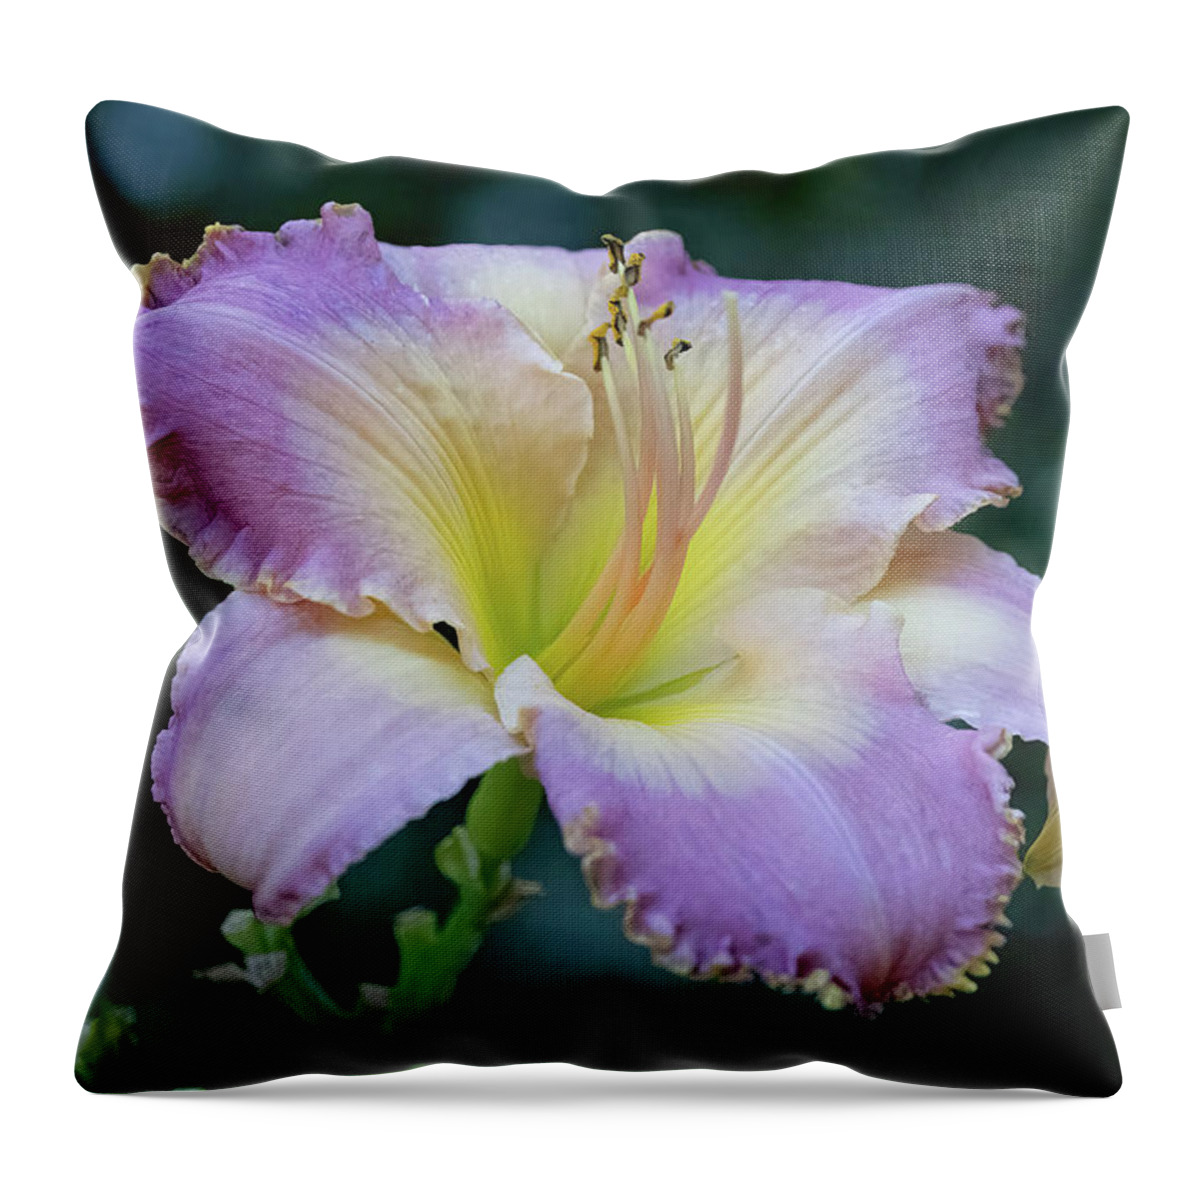 White Throw Pillow featuring the photograph Vintage Ruffles by Gina Fitzhugh